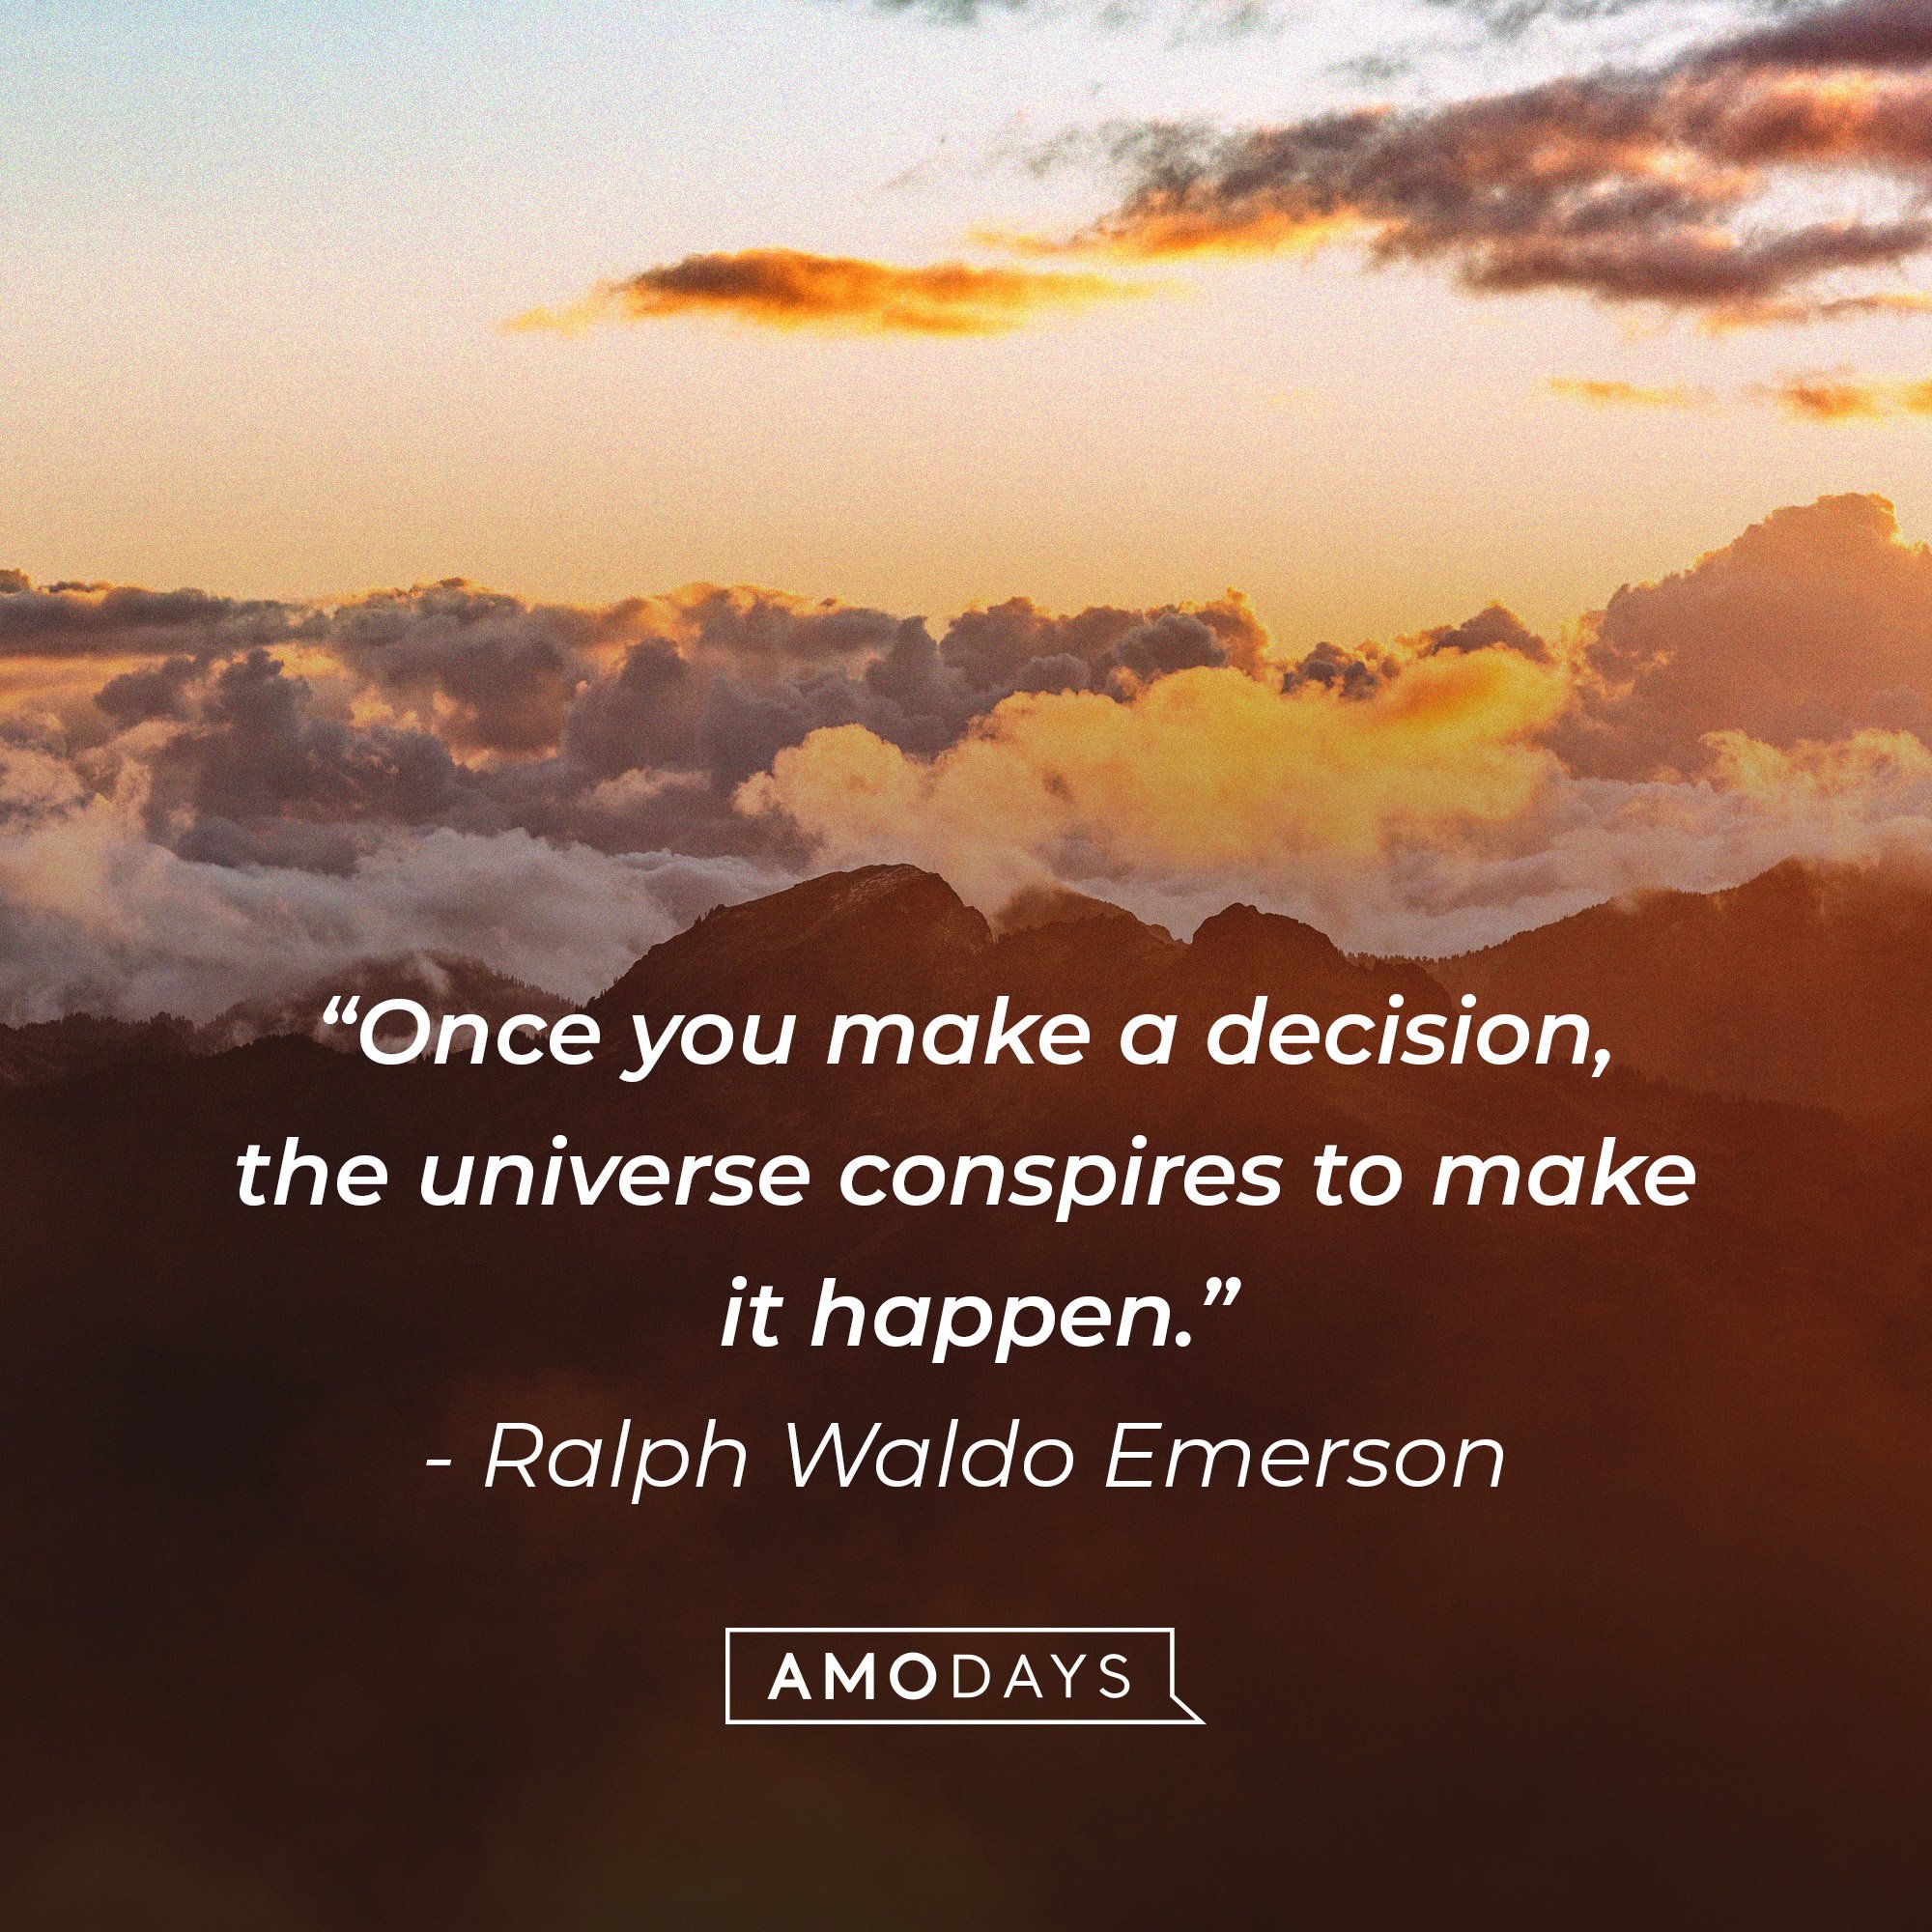  Ralph Waldo Emerson's quote: “Once you make a decision, the universe conspires to make it happen.” | Image: AmoDays